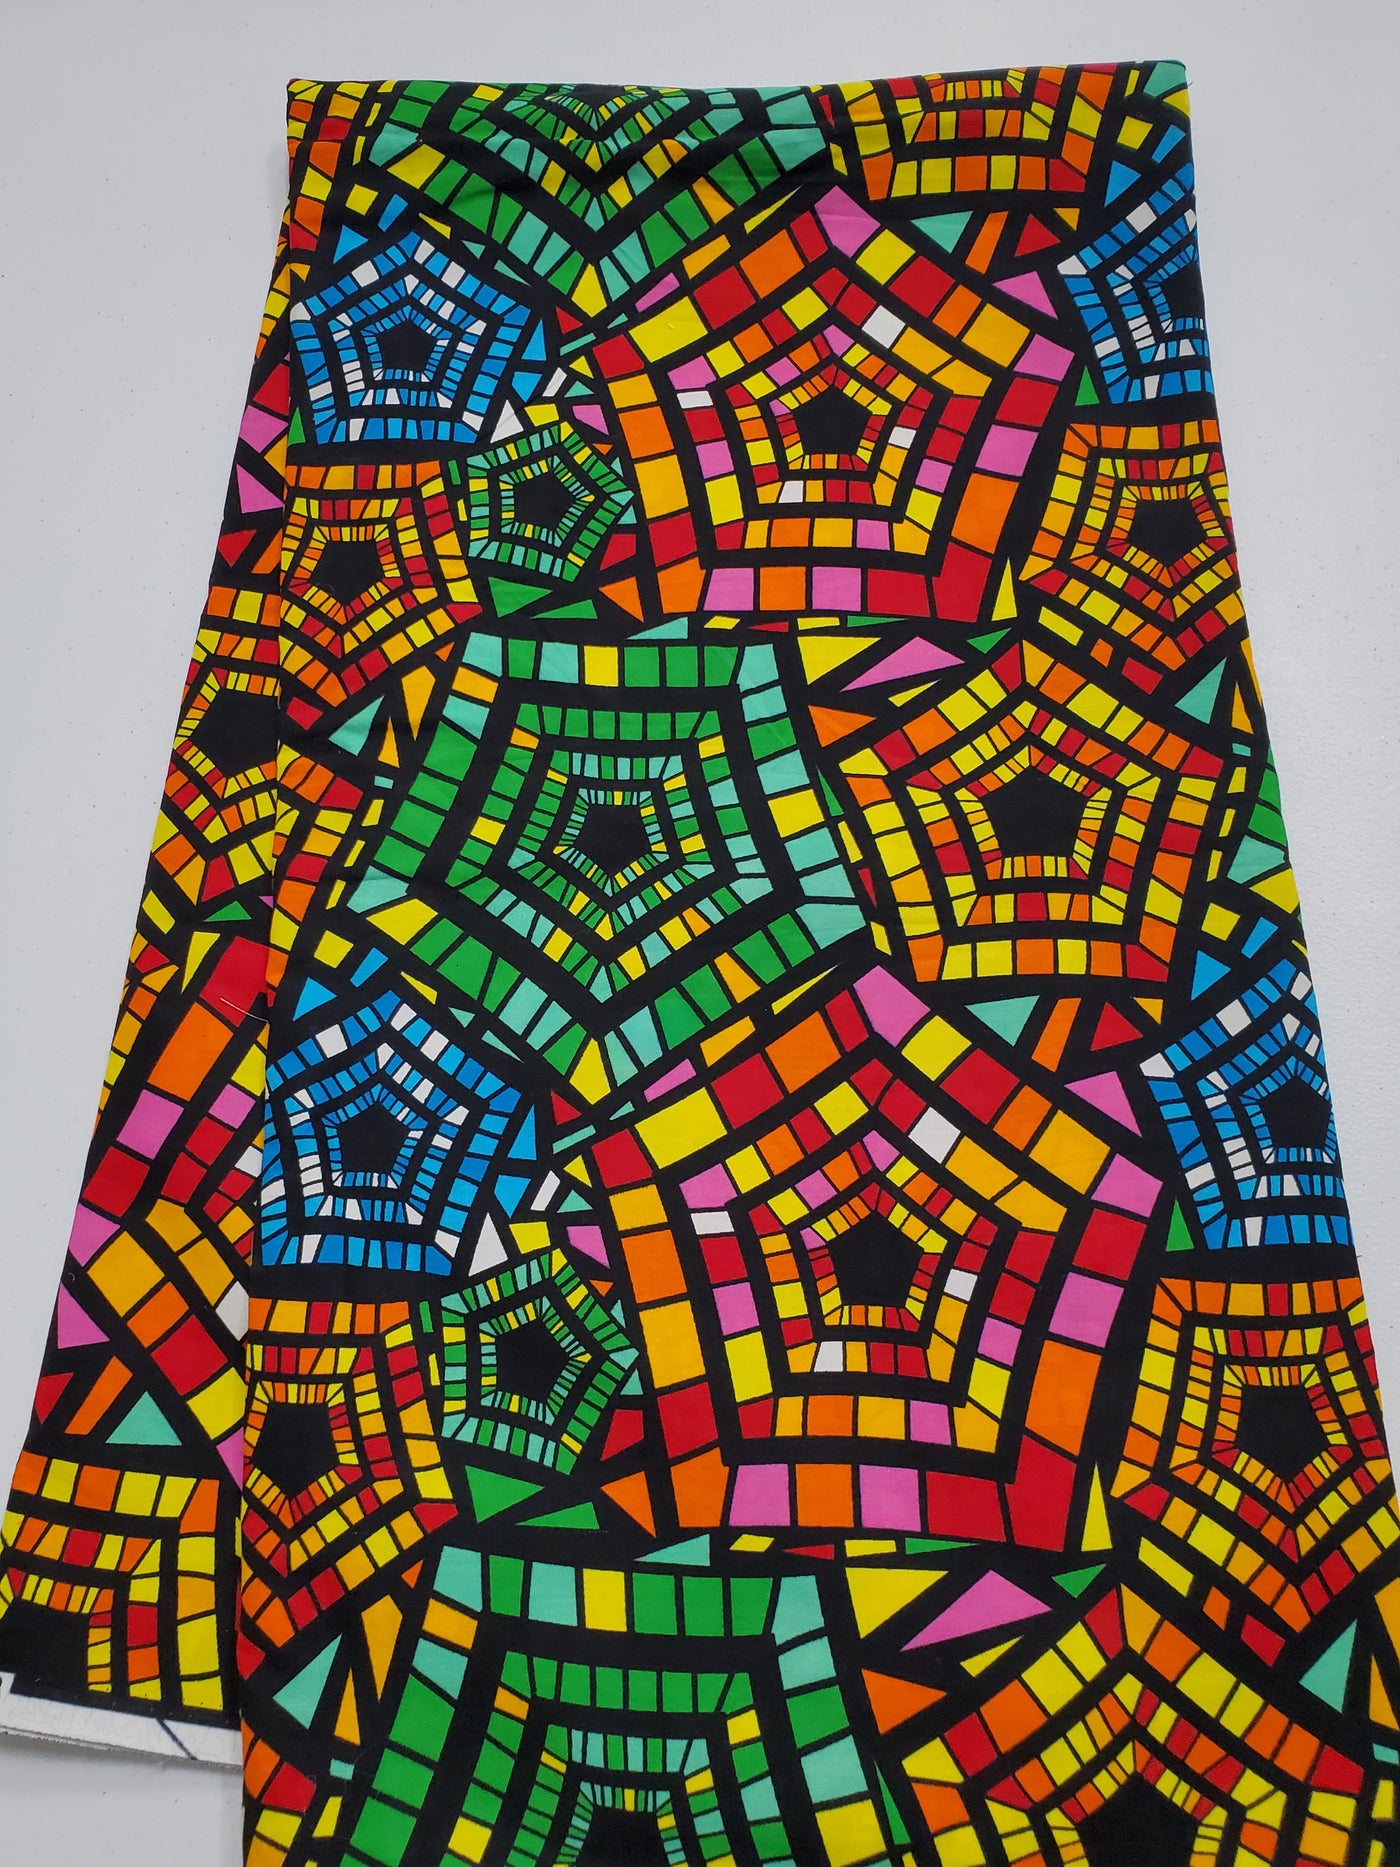 Green, Blue, Red, and Yellow African Ankara Fabric